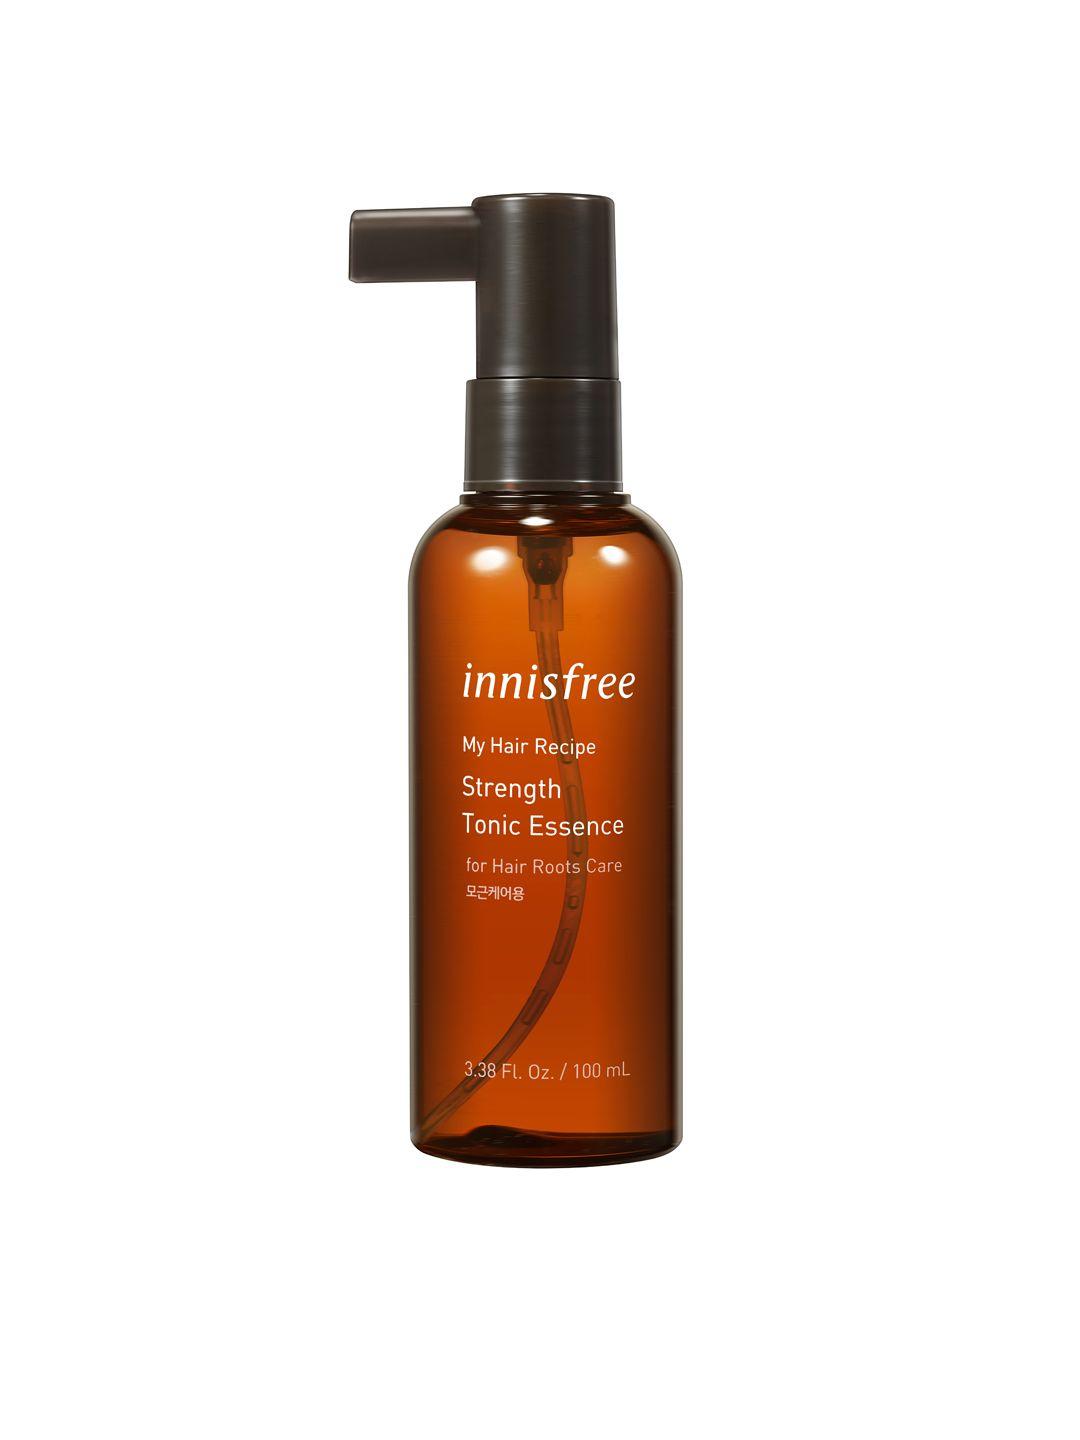 innisfree-my-hair-recipe-strength-tonic-essence-for-hair-roots-care---330-ml